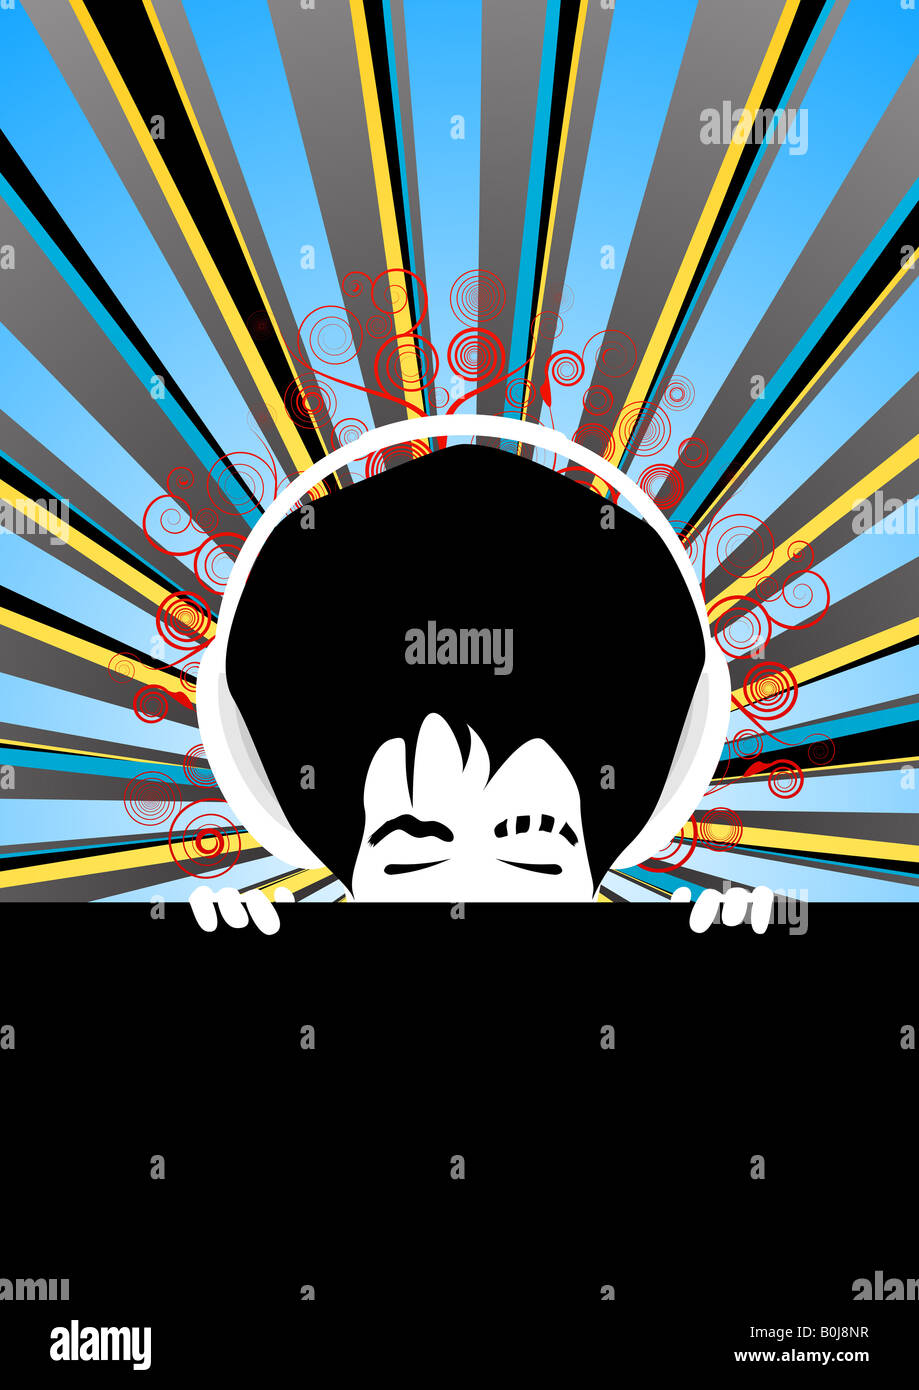 Vector illustration of a music dj background with a central man with closed eyes listening to music Stock Photo